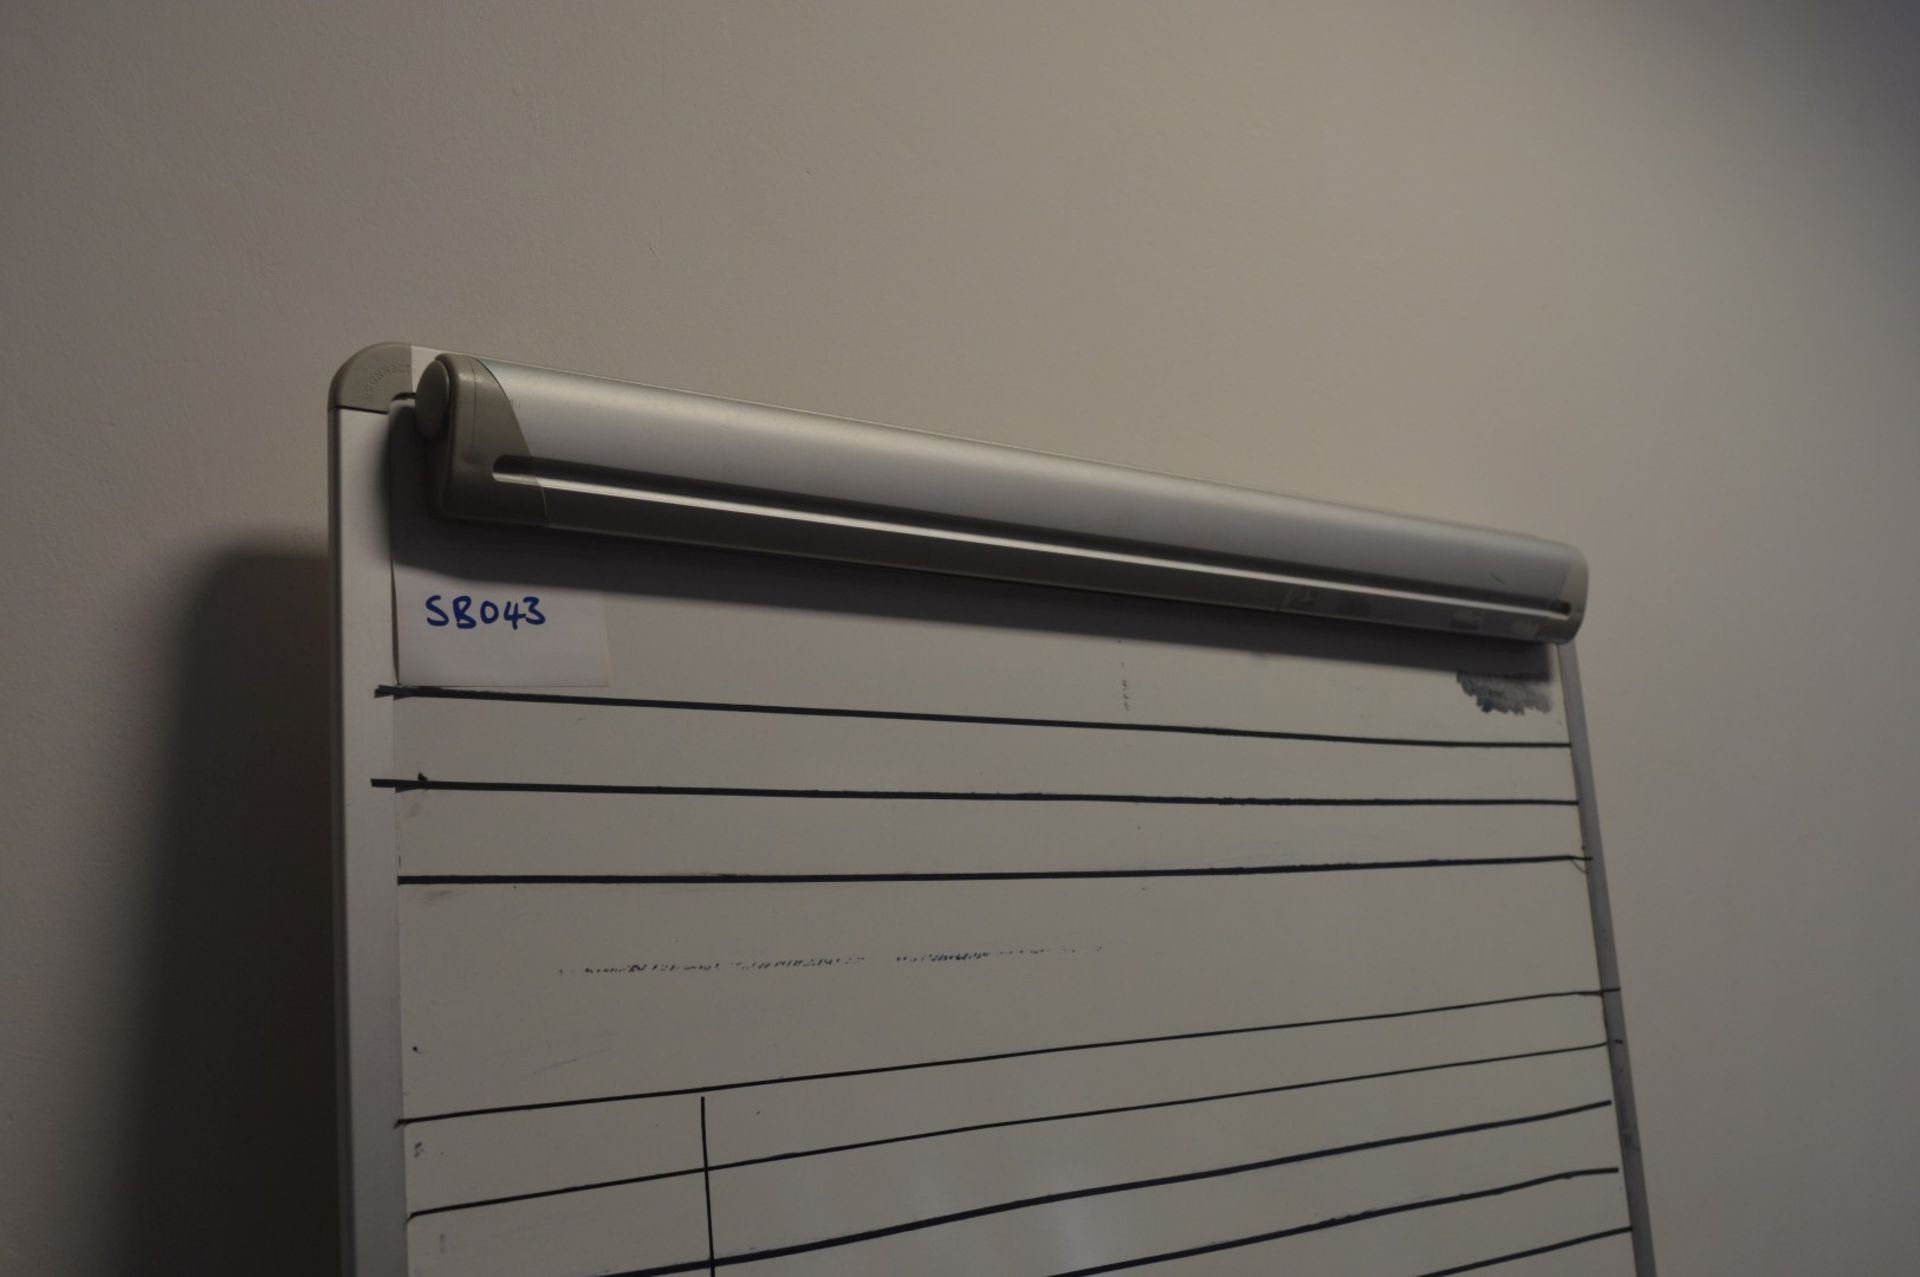 1 x Whiteboard Flip Chart - Overall Height: 170 cm x Board Size: 70 x 100 cm - Ref SB043 - CL106 - - Image 2 of 3